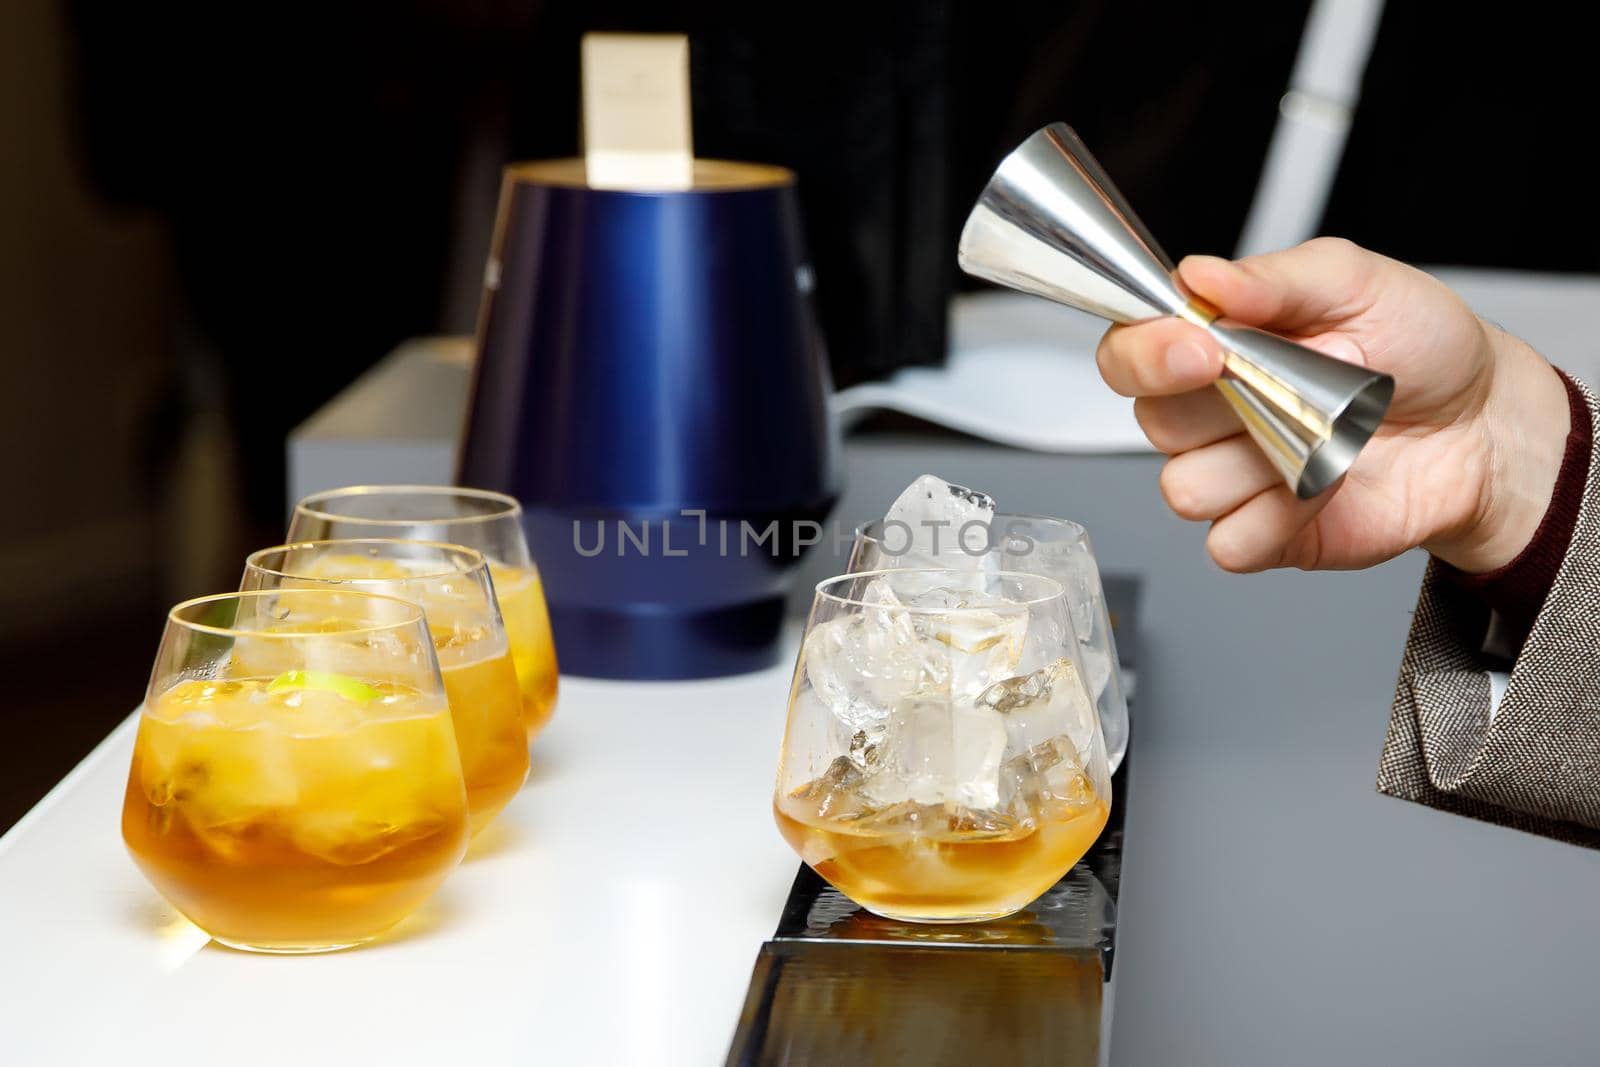 The bartender makes a cocktail. The barmen pour alcohol from a steel measuring glass